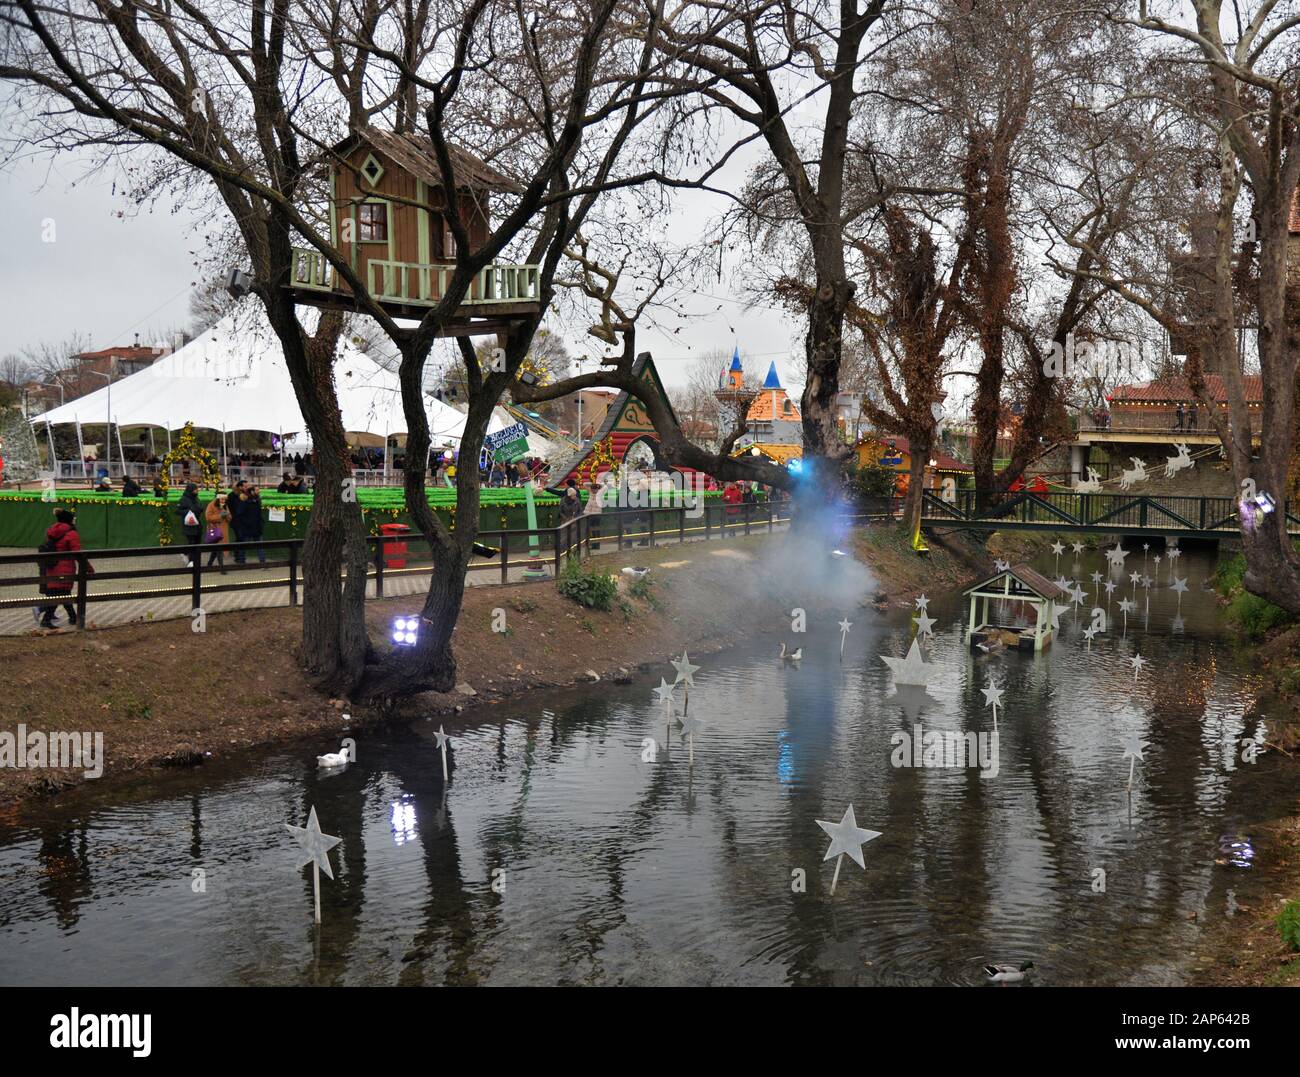 Small decorated pond and tree house situated in an area used as a venue for the 'Mill of the elves'a fair taking place at Christmas.Trikala, Greece. Stock Photo